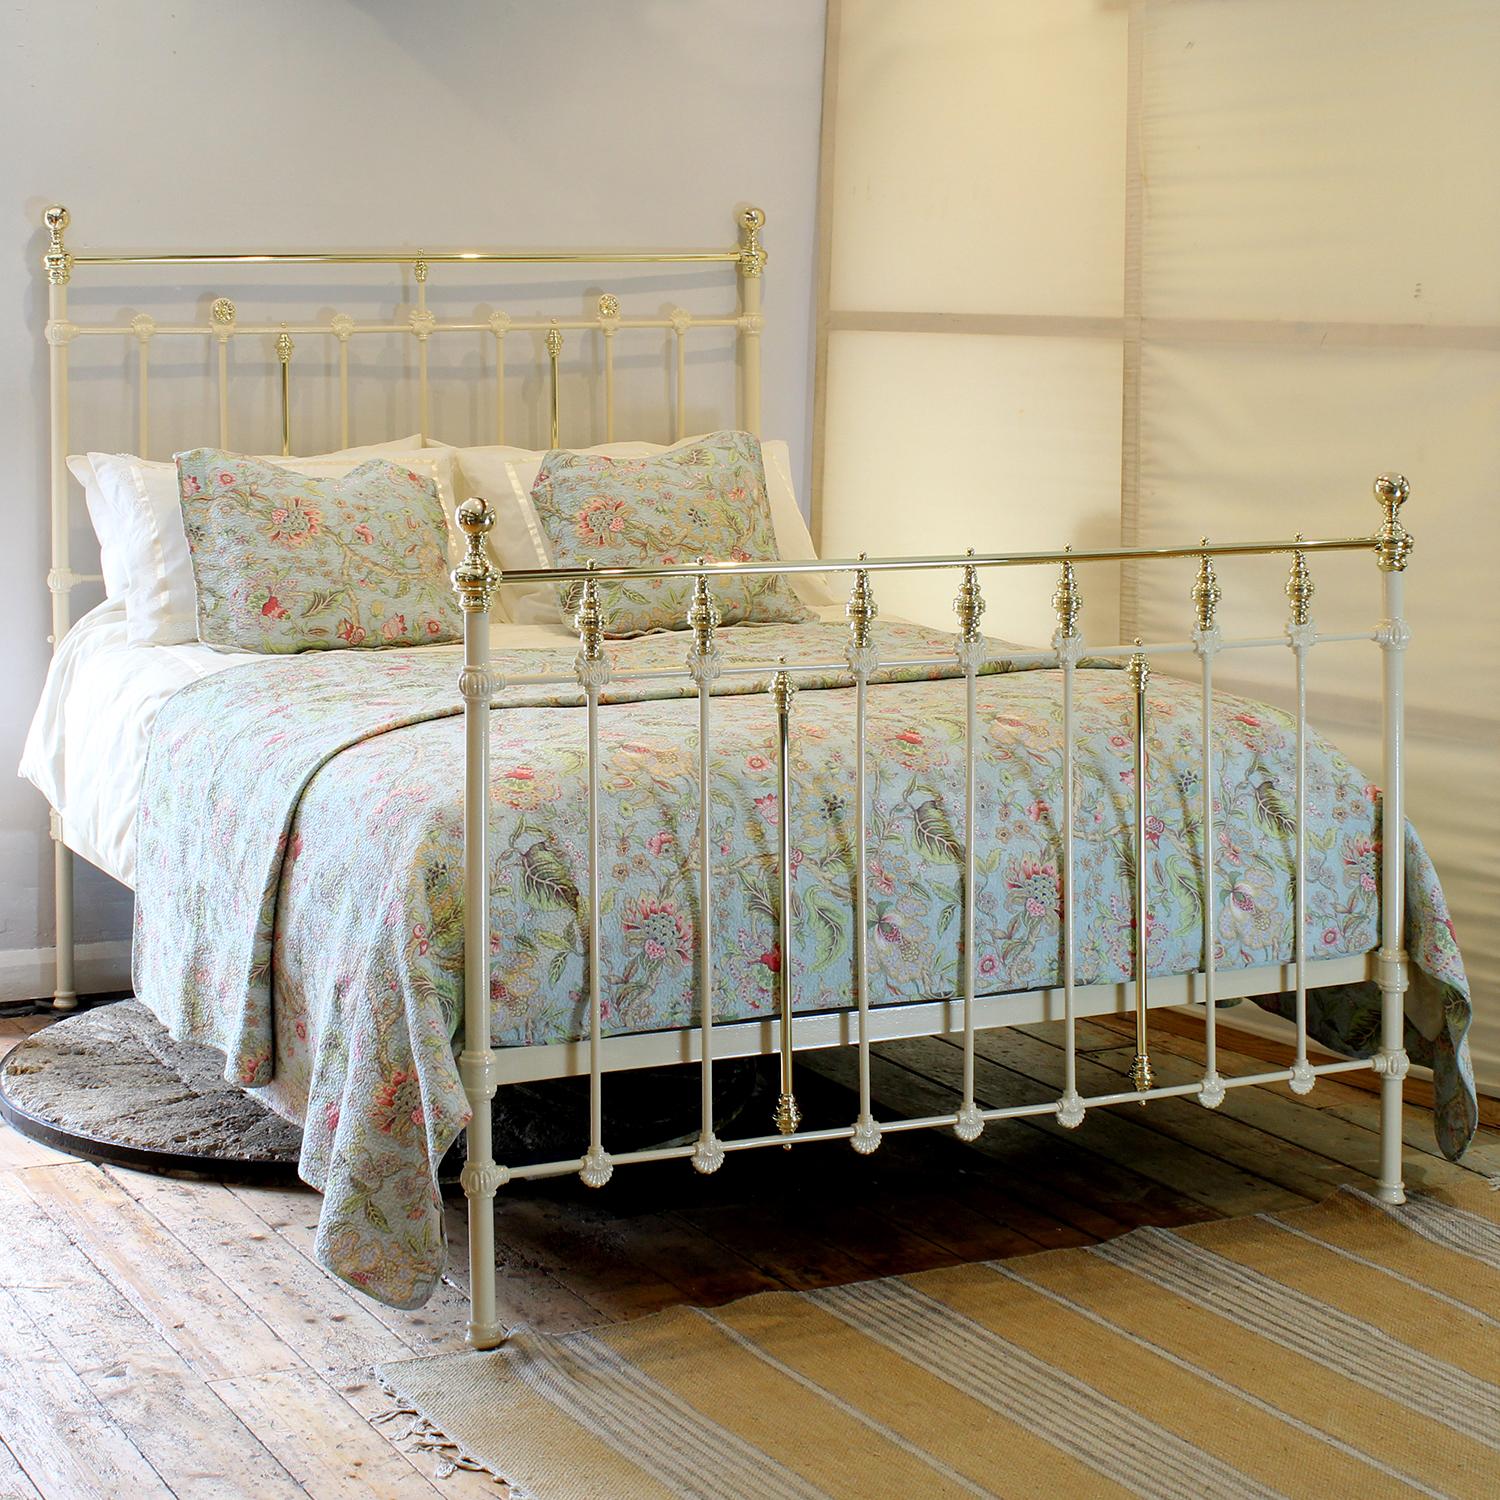 A Victorian brass and iron bed with decorative foot board featuring a row of brass trumpets and head board featuring raised rosettes, finished in soft cream.

This bed accepts a US Queen size (or UK King Size) 60 inch wide base and mattress